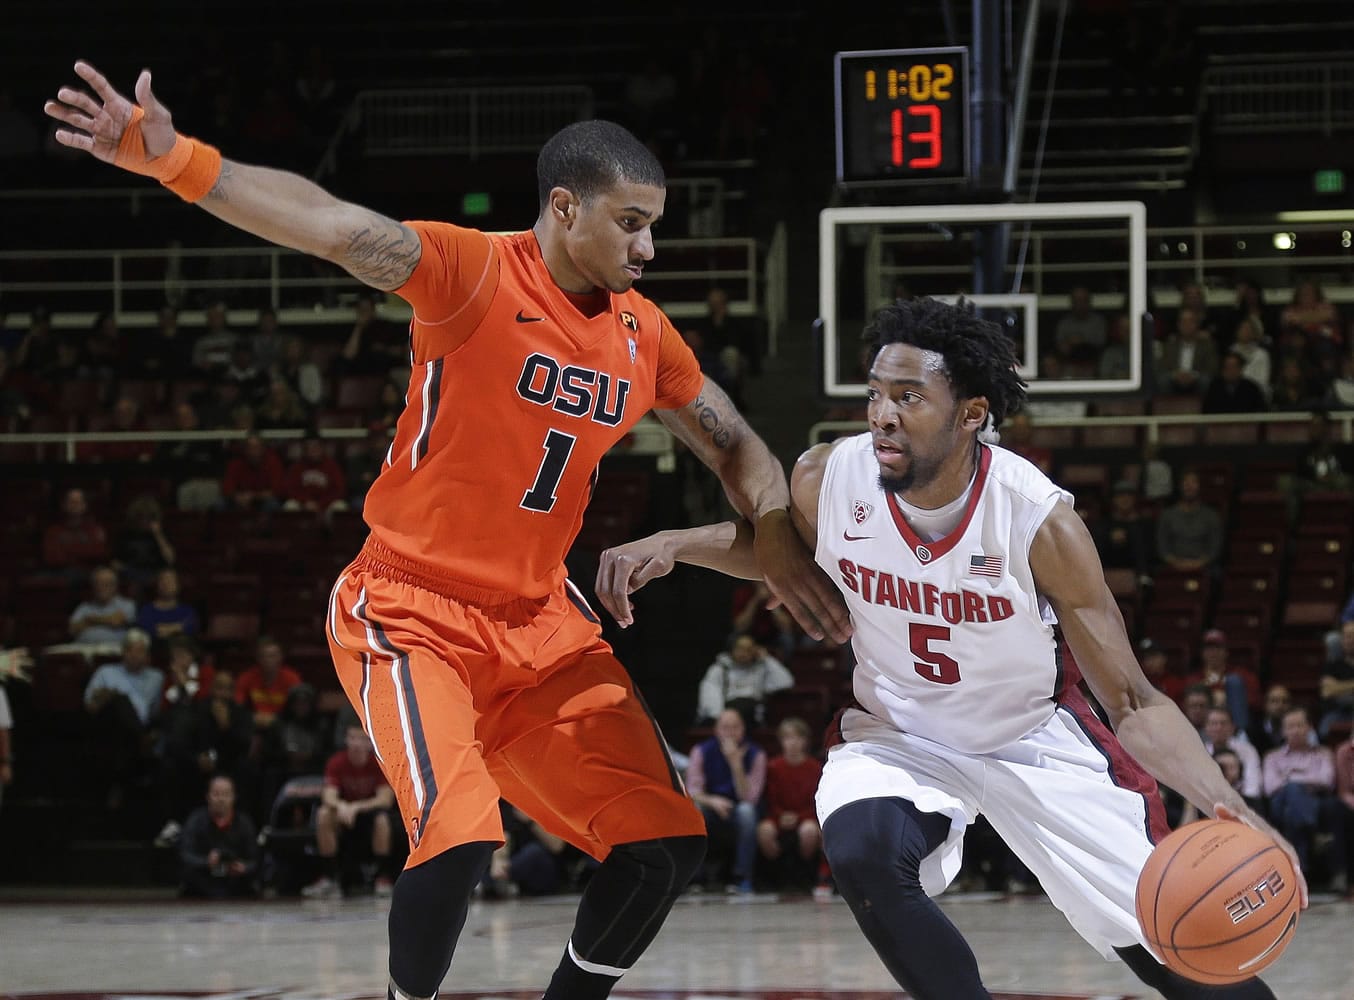 Stanford guard Chasson Randle, right, dribbles around Oregon State guard Gary Payton II during the second half Thursday, Feb. 26, 2015, in Stanford, Calif. Stanford won 75-48.